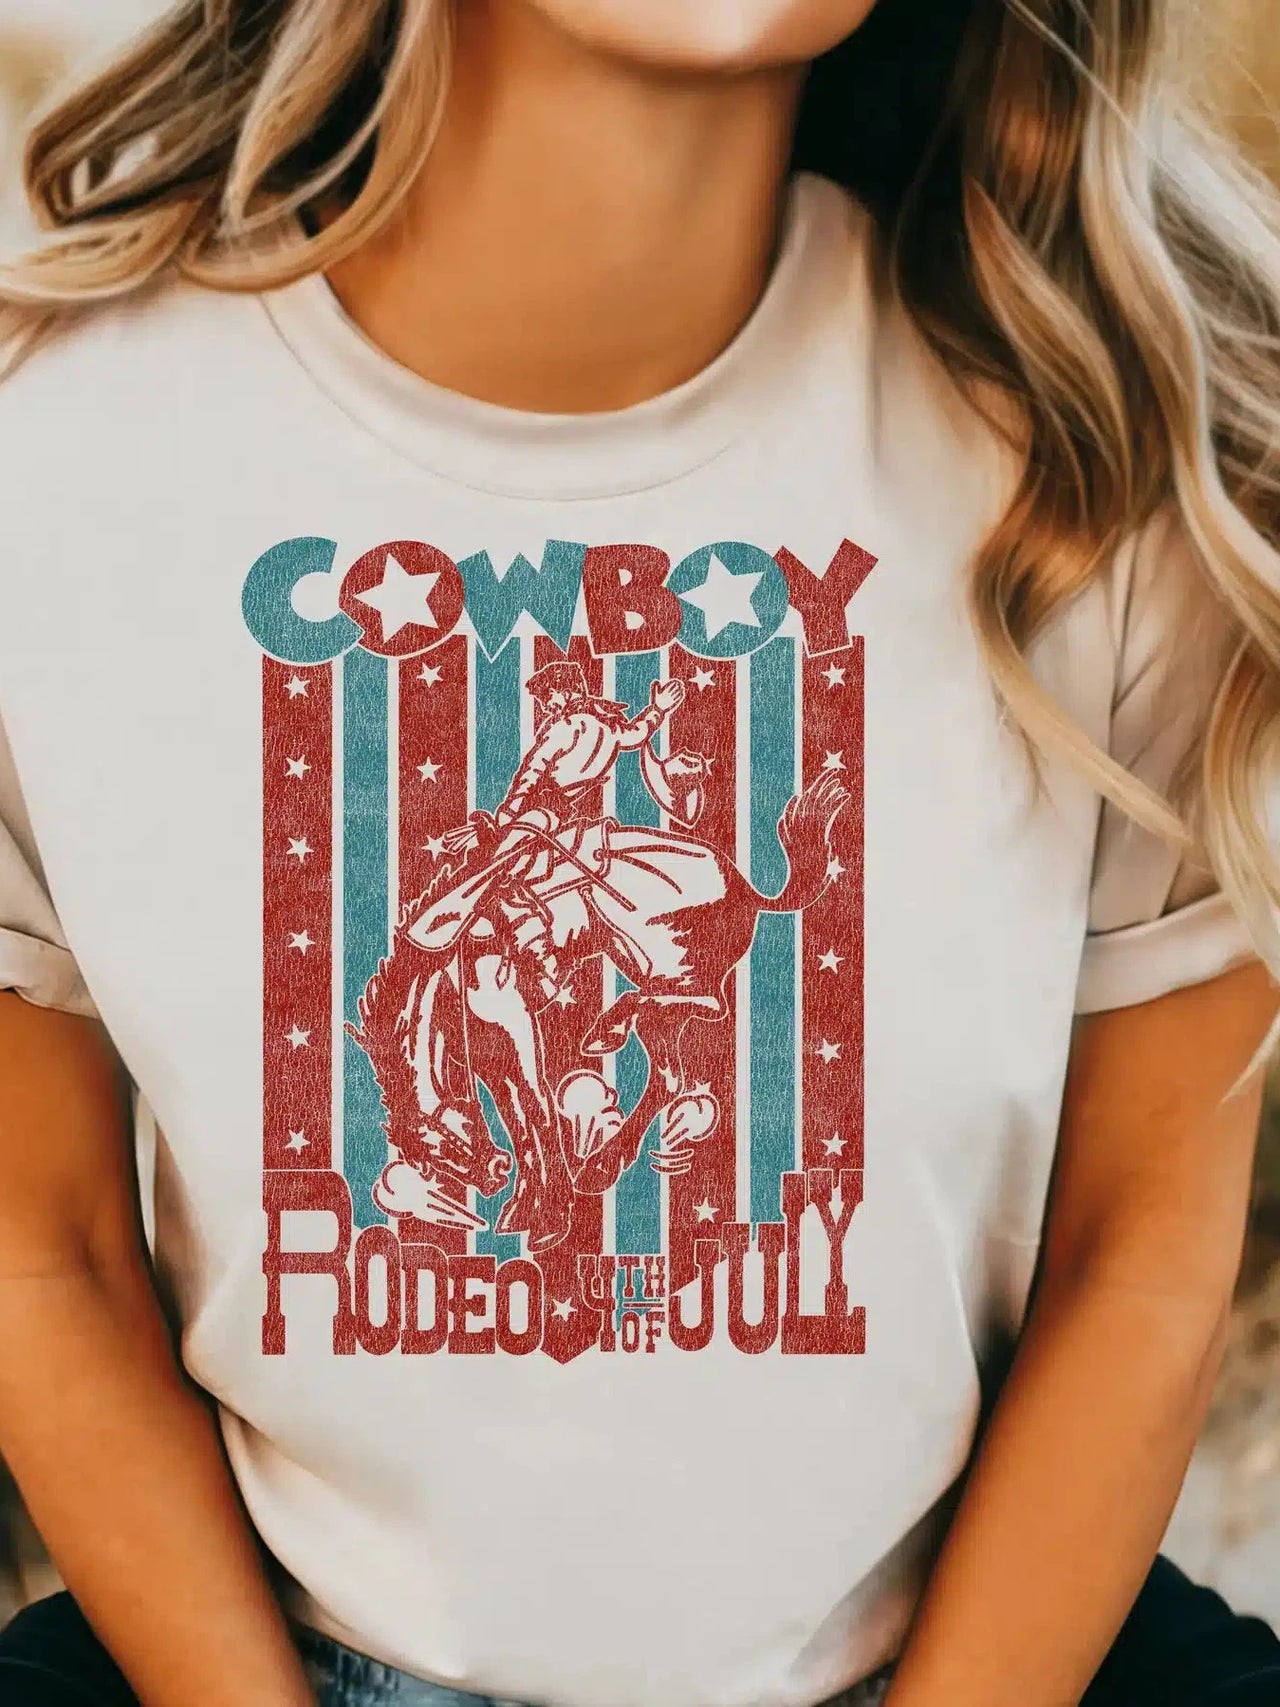 July 4th Rodeo Poster T shirt